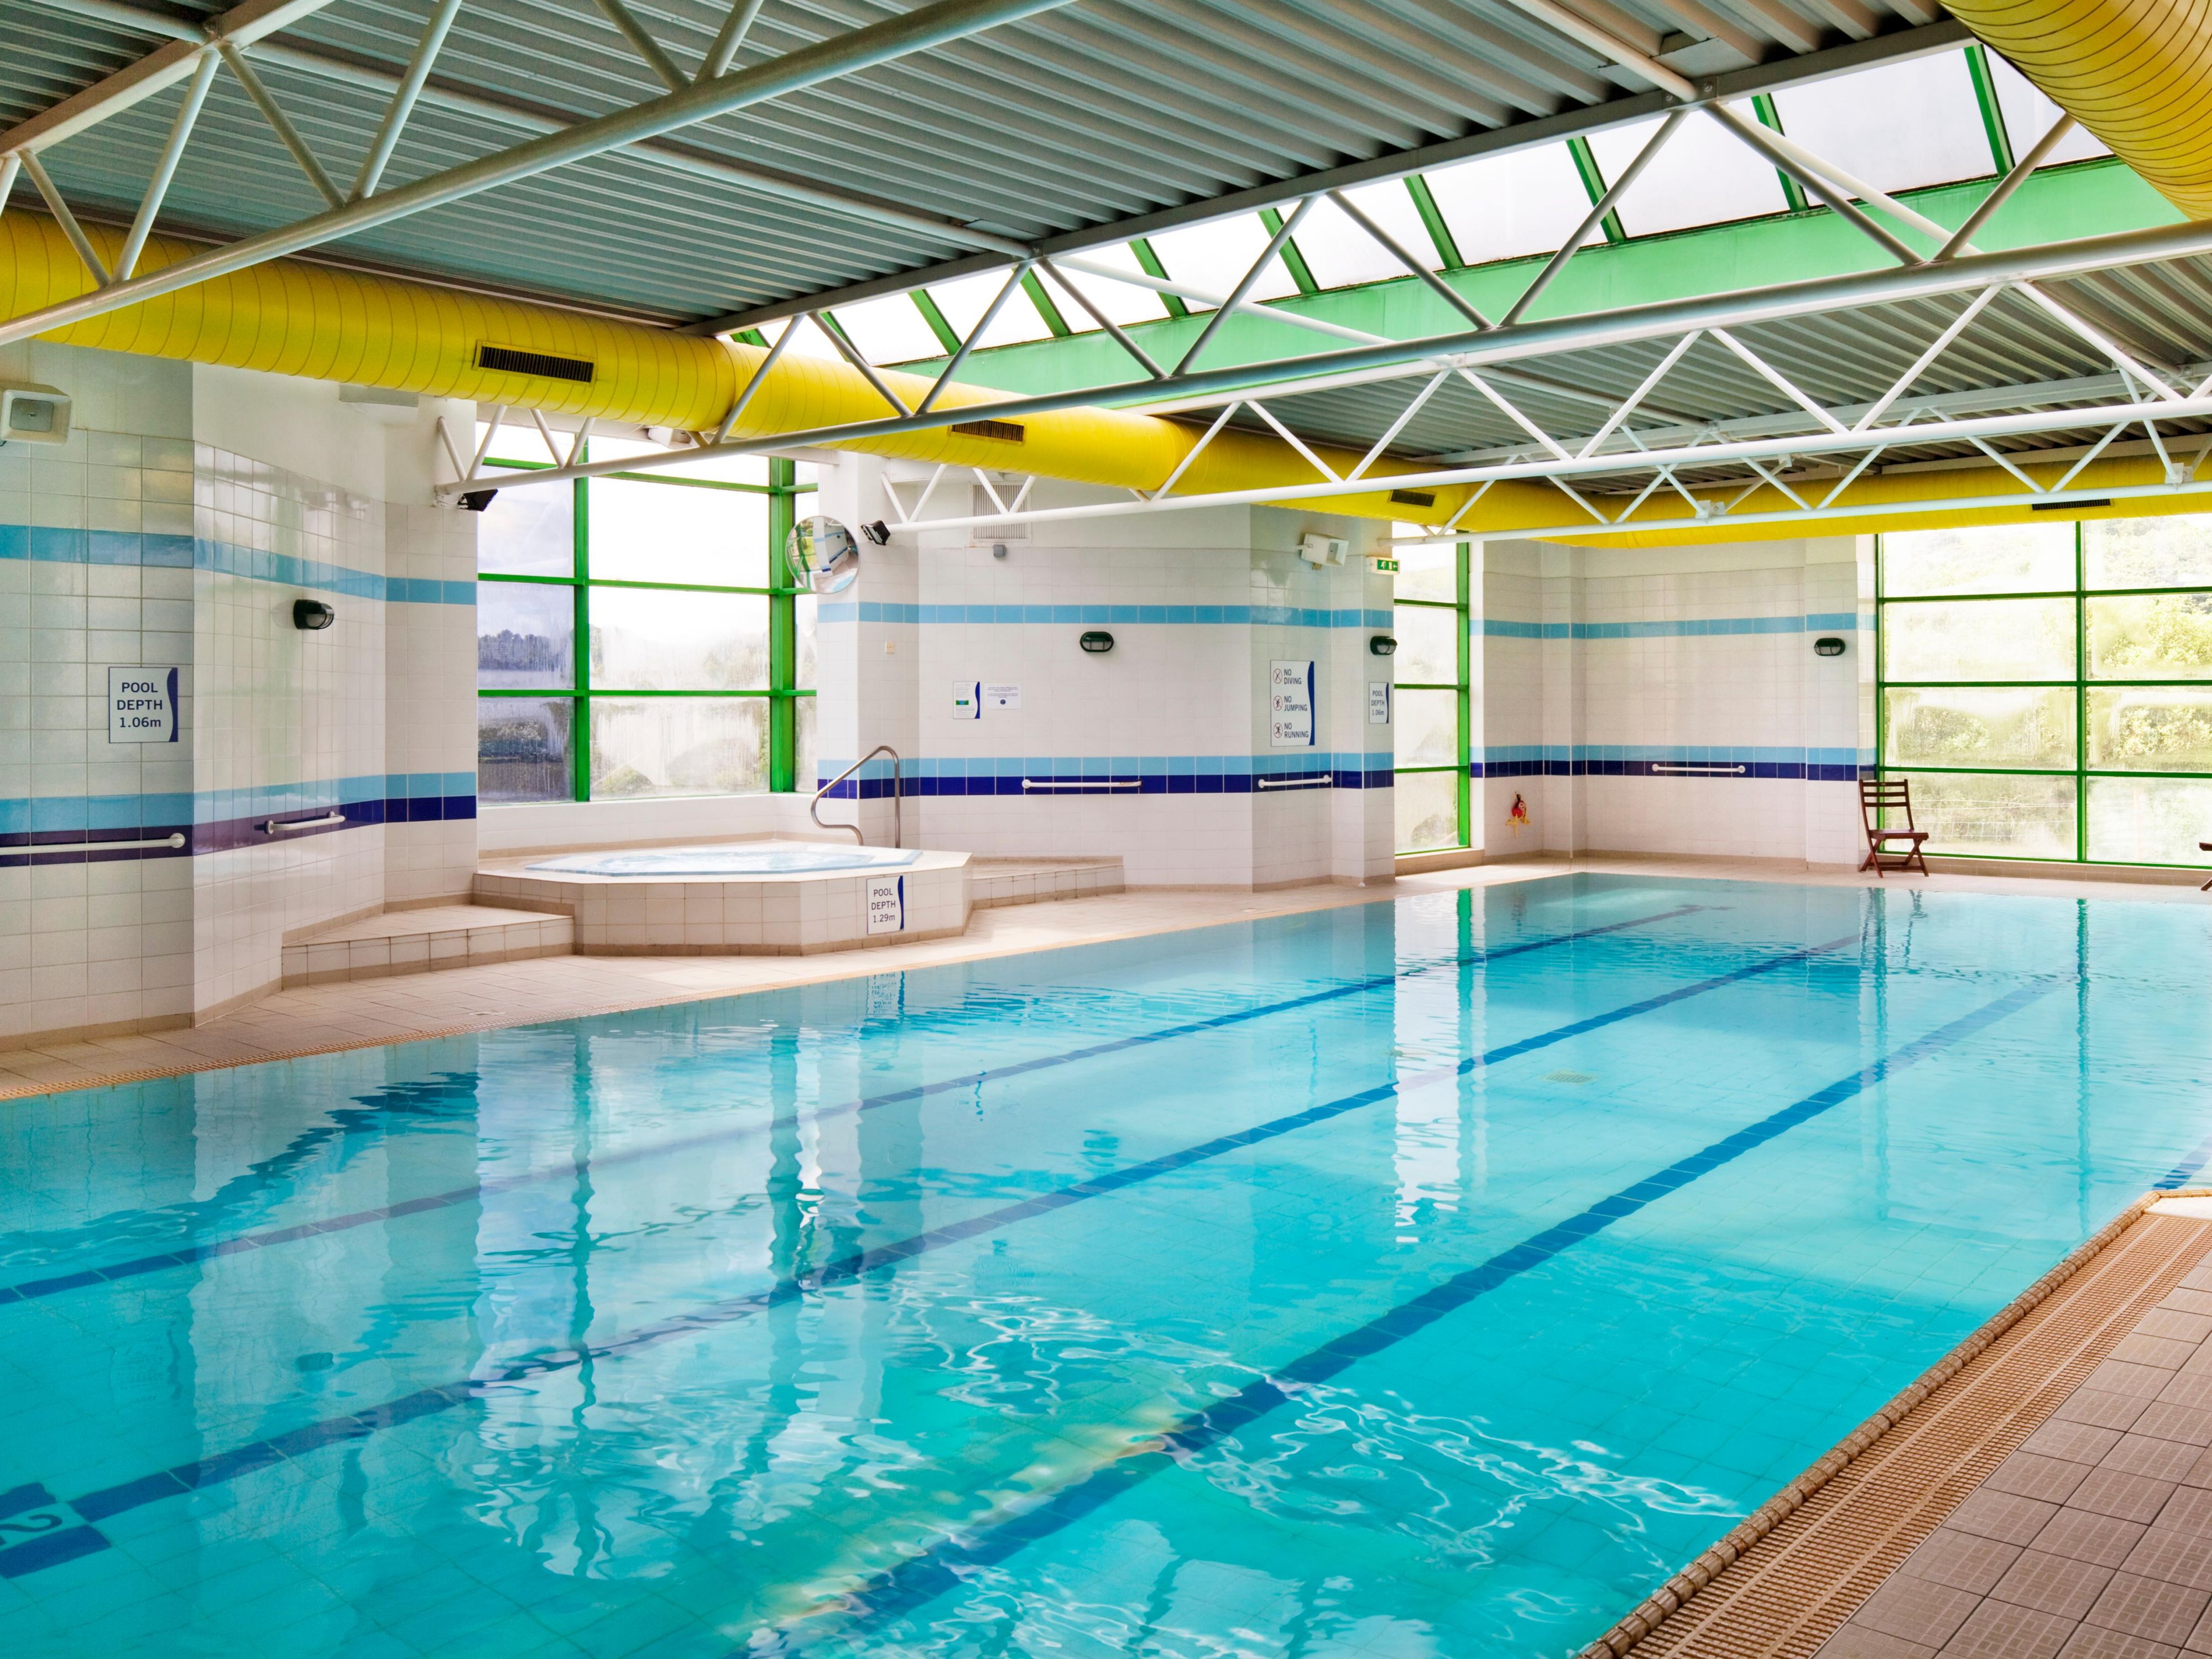 The You Fit Stoke Health Club offers you a wealth of options to get active and burn off some energy or to simply relax and unwind. Facilities include: swimming pool, spa, individual saunas, fully-equipped gym with resistance training and aerobic equipment.